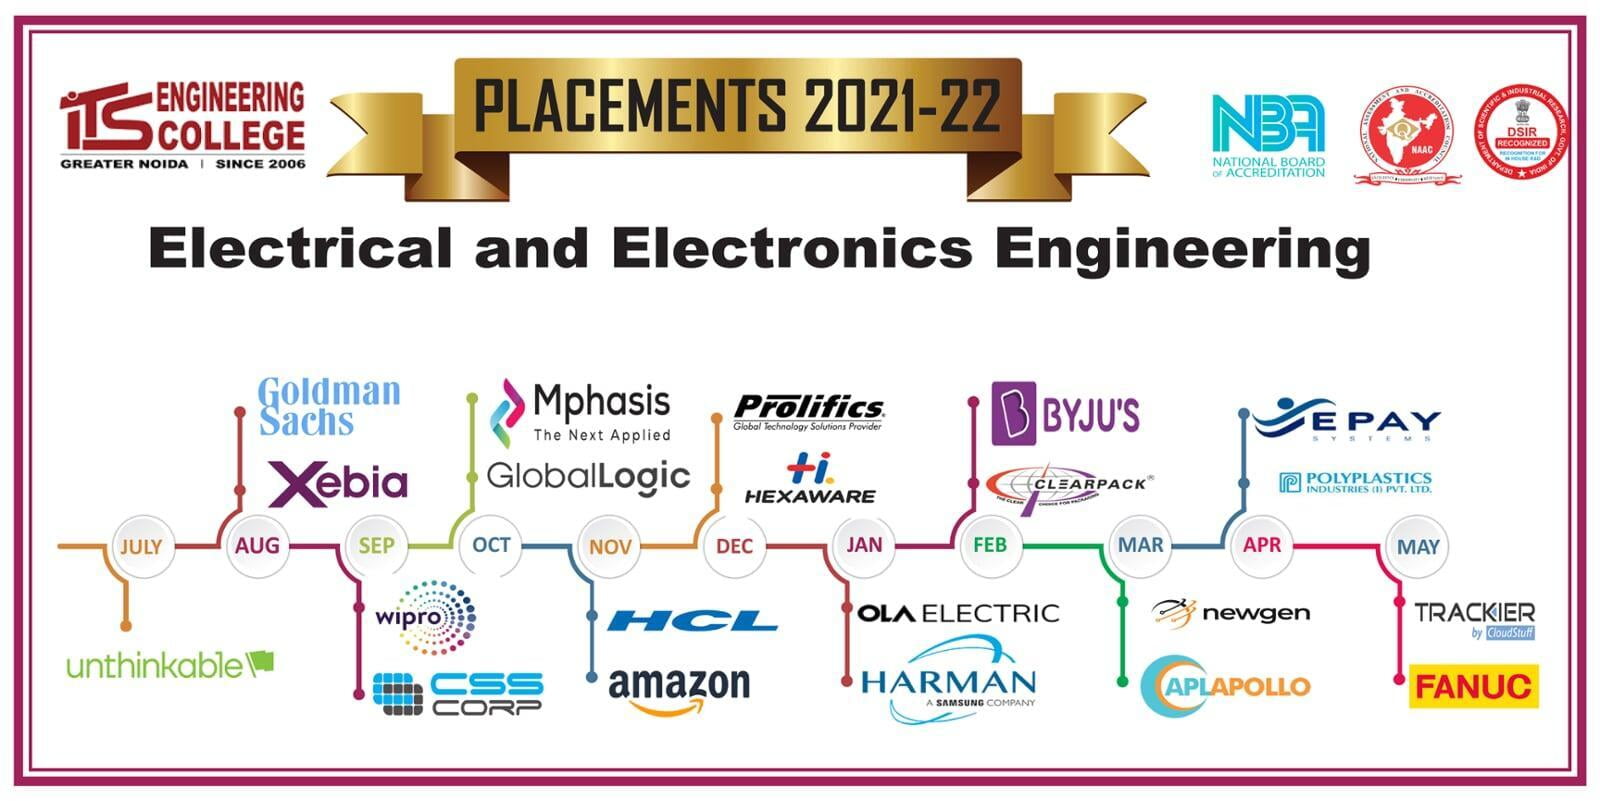 Electrical & Electronics Engineering Recruiters 2022 ITS Engineering College